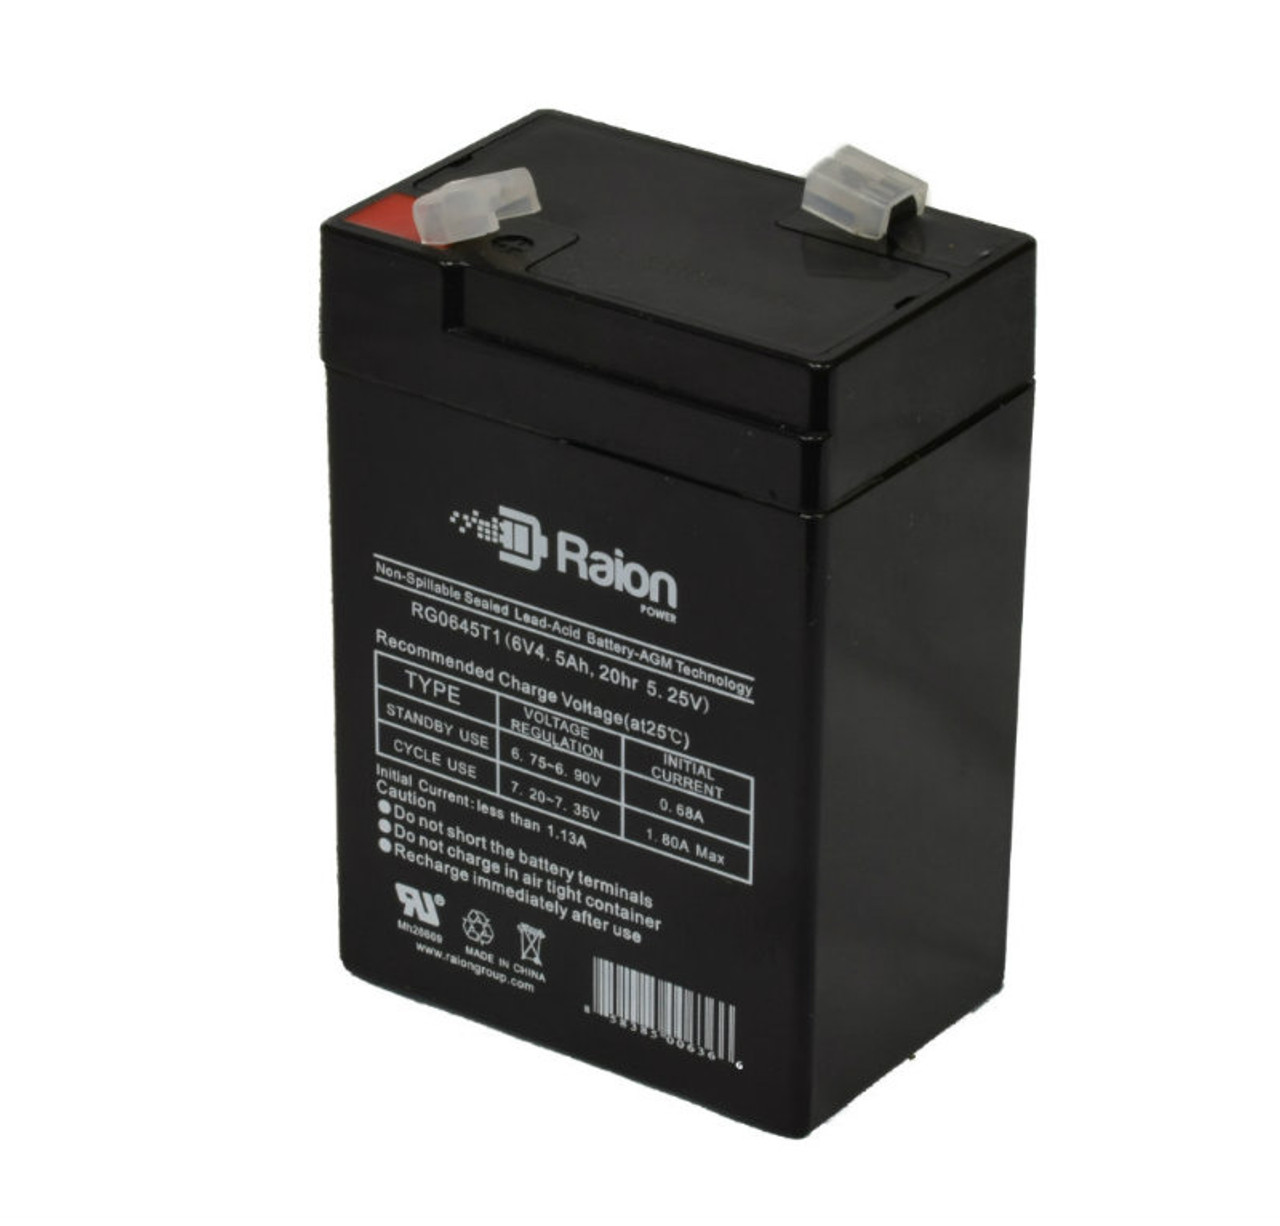 Raion Power RG0645T1 6V 4.5Ah Replacement Battery Cartridge for Lithonia ELM2S13